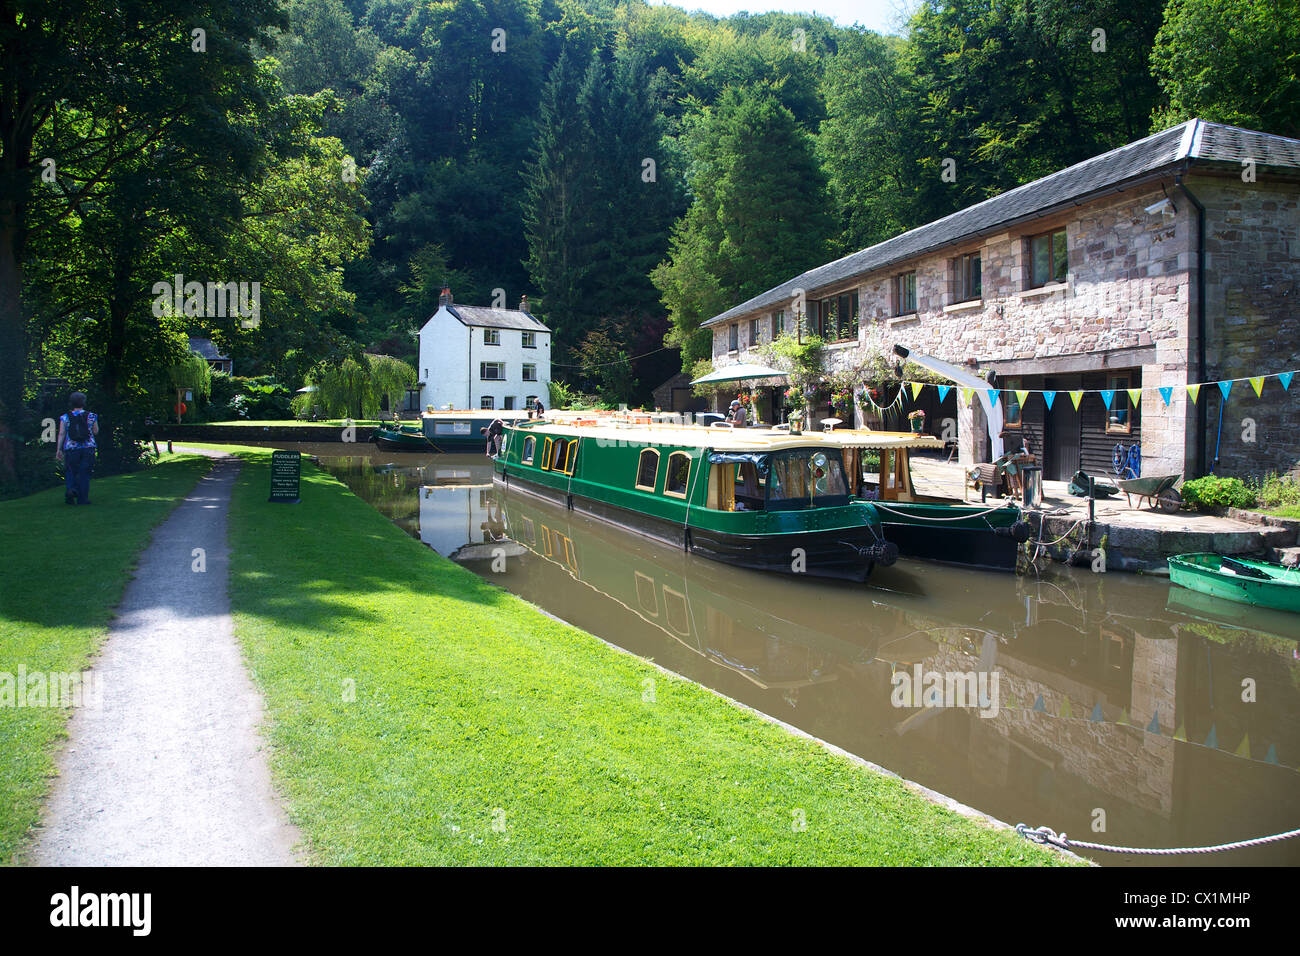 Narrow boats on Monmouthshire and Brecon Canal at Llanfoist Wharf, near Abergavenny, Monmouthshire, UK Stock Photo